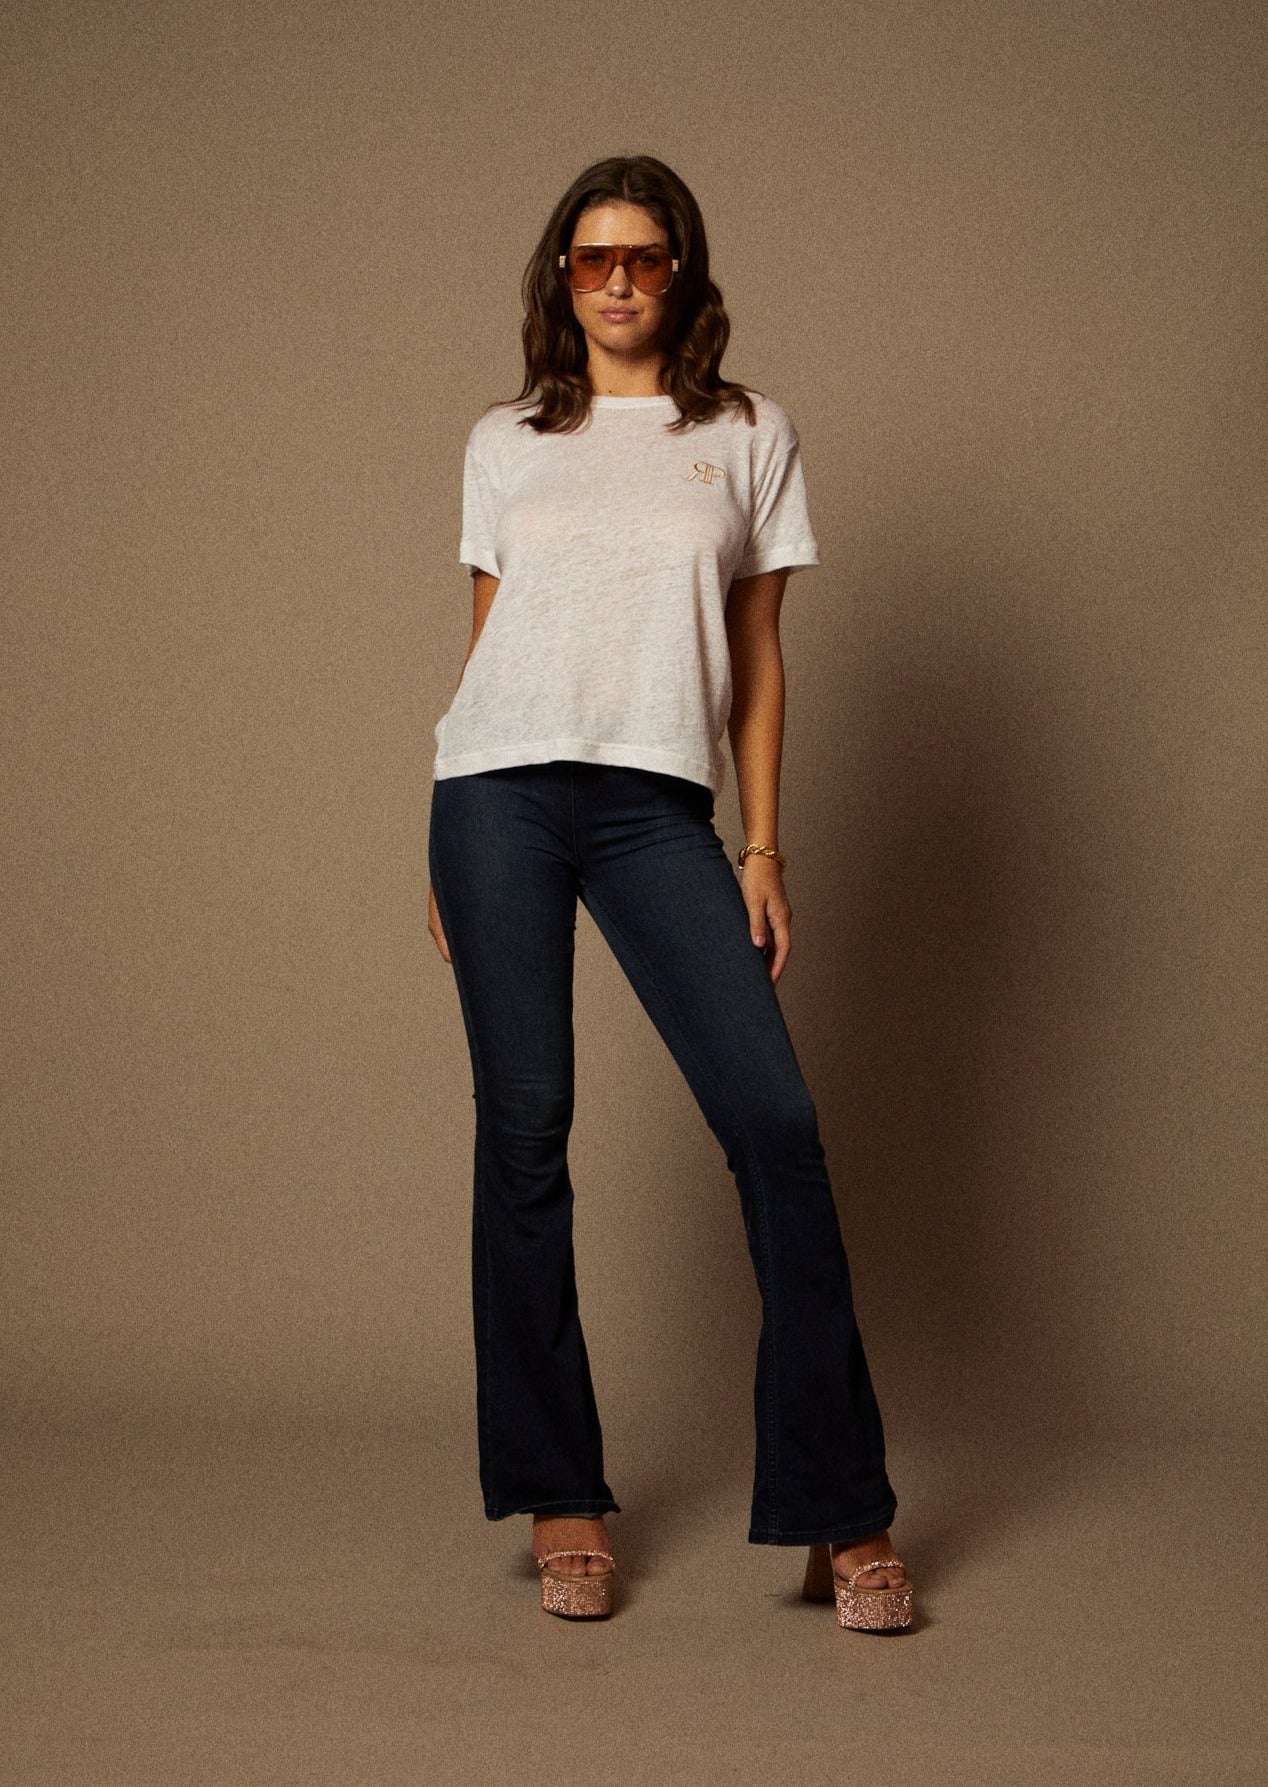 The Layla Tee in White Linen Jersey